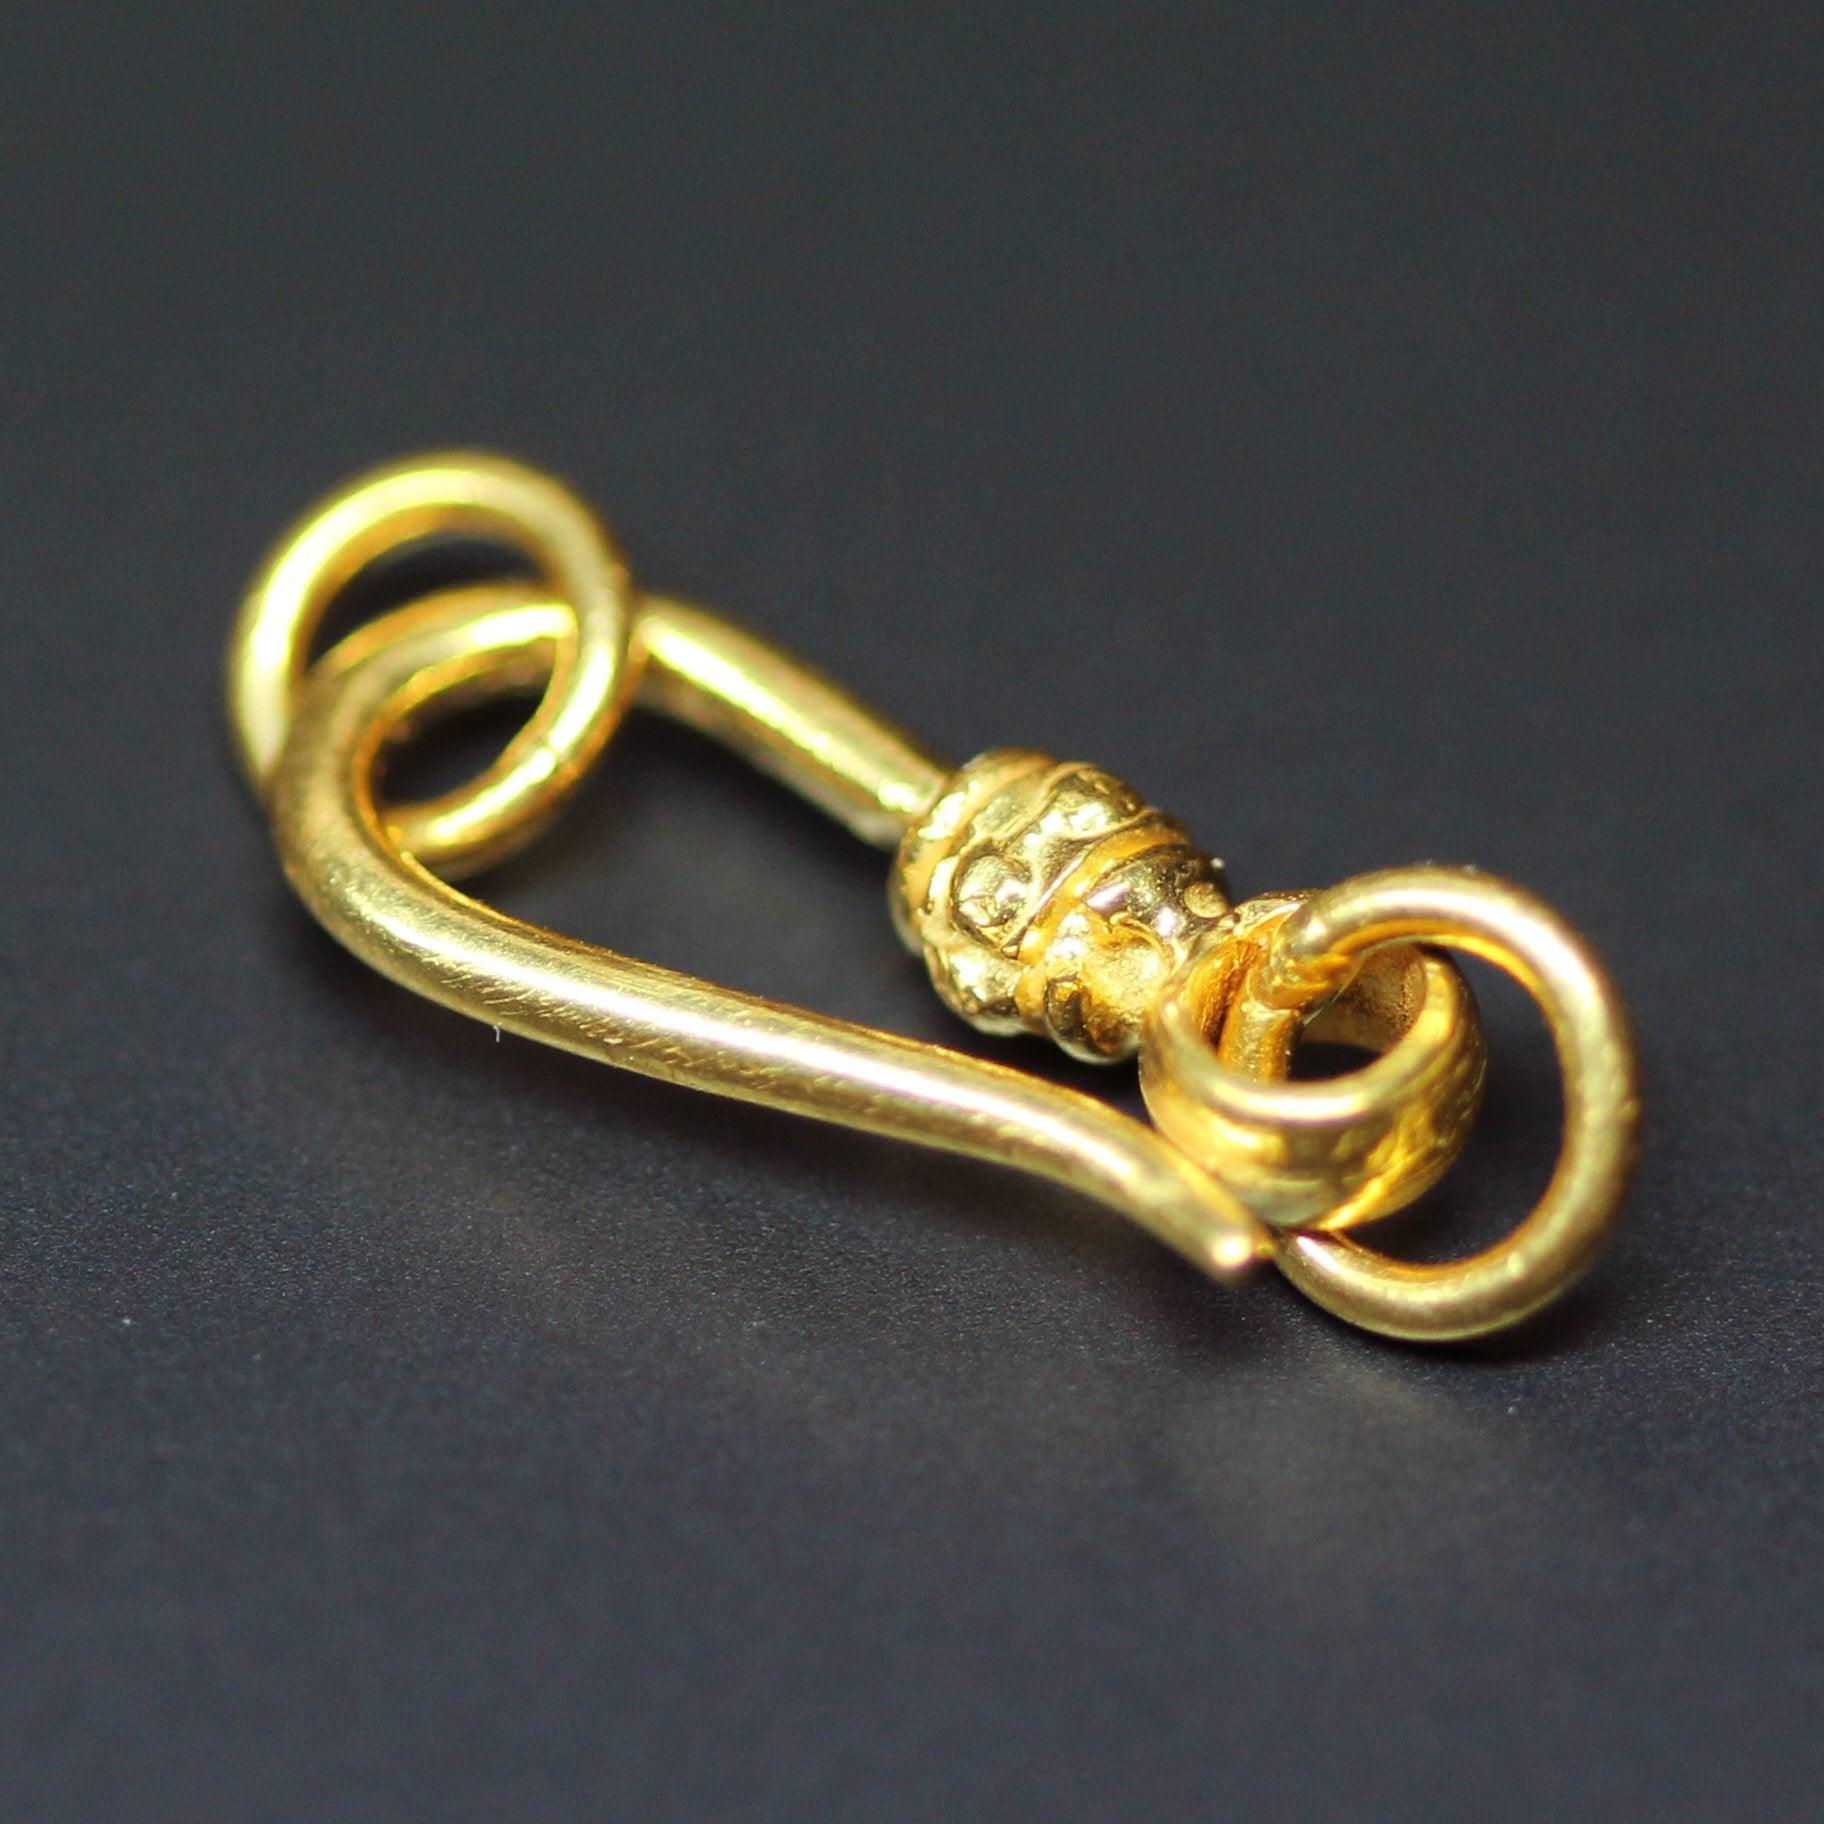 Gold S Clasp, Gold Necklace Clasps, Gold S Hook Clasp, Bracelet Findings,  Gold Plated Toggle, Necklace Clasp, S Clasp, 2 pc